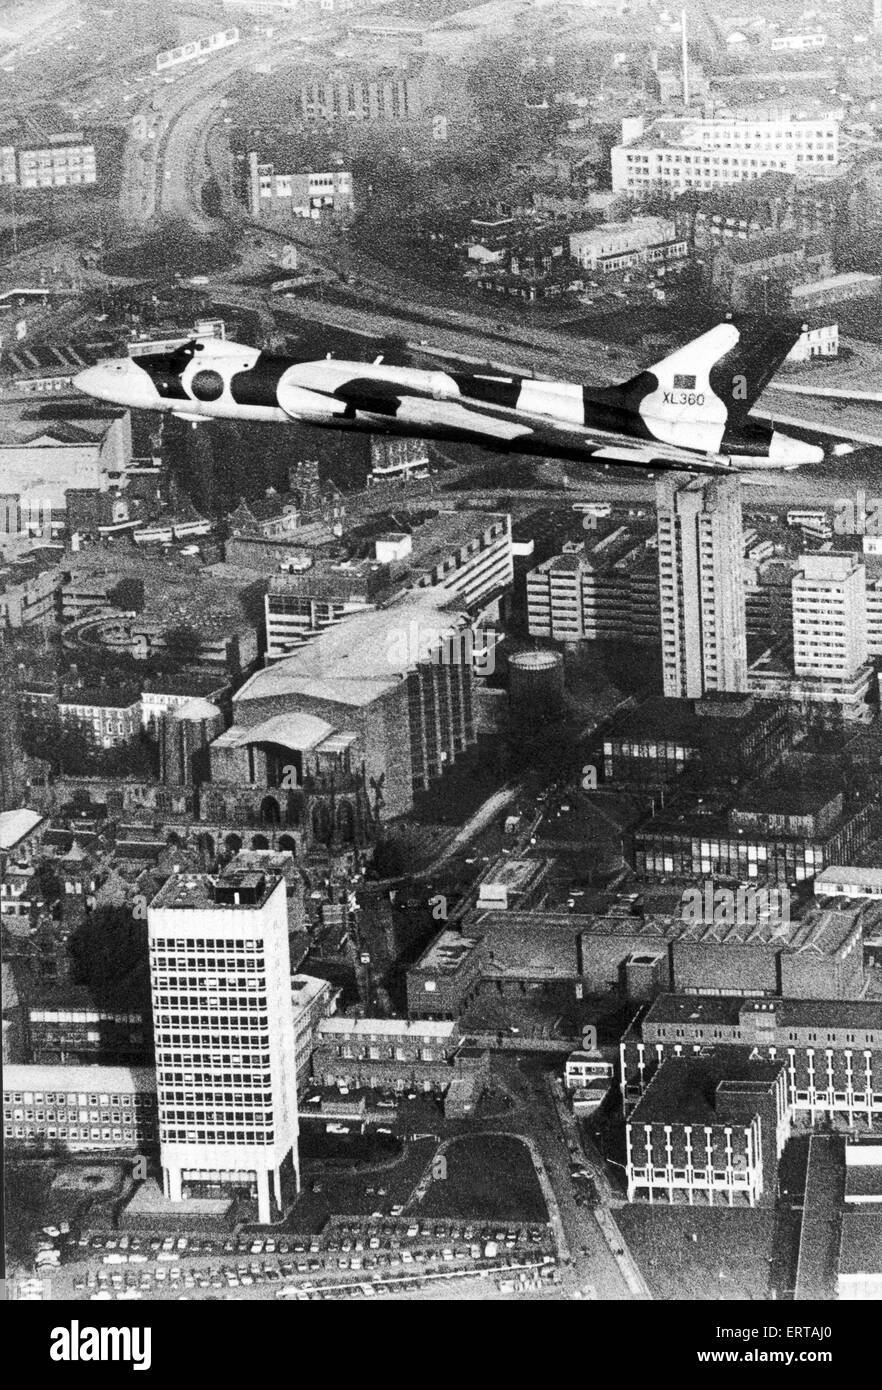 Vulcan Delta bomber NQJ swoops spectacularly over the city of Coventry as a thank you to the people who helped save her. The plane crossed the city at 2000 feet to salute those in Coventry and Warwickshire who had raised almost ¿5000 in three weeks to secure the aircraft from the Ministry of Defence. It will be held at the Midlands Air Museum at Baginton in the open until the planned Sir Frank Whittle hangar is built. February 1983. Stock Photo